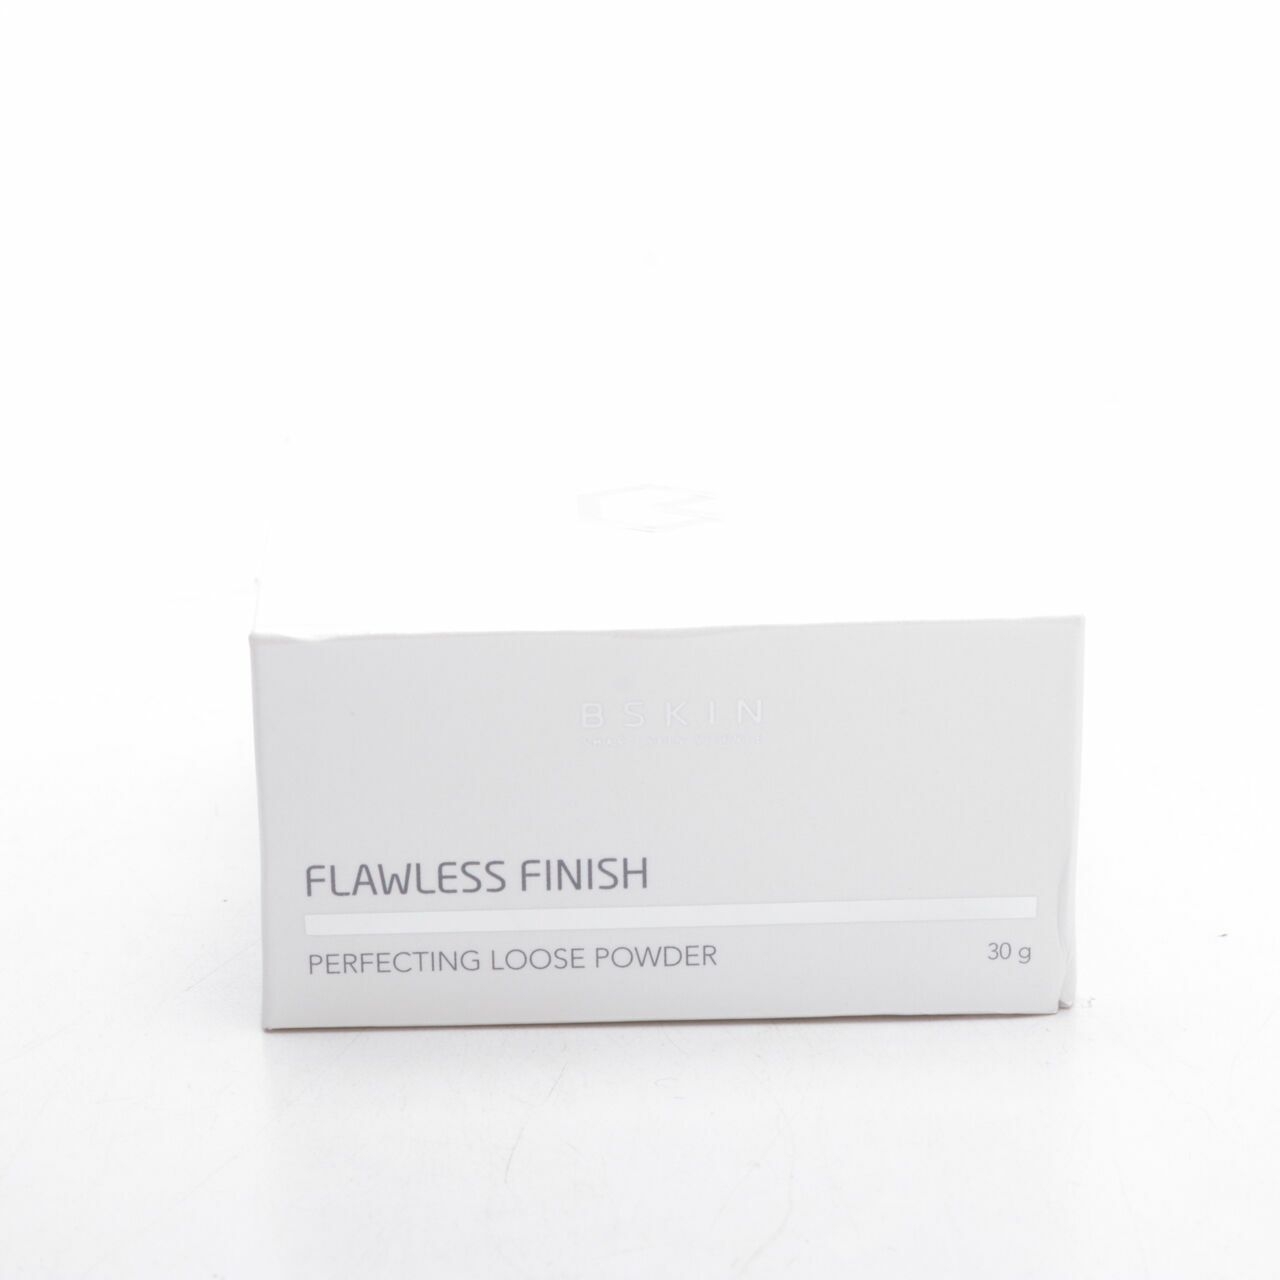 BSKIN Flawless Finish Perfecting Loose Powder Faces